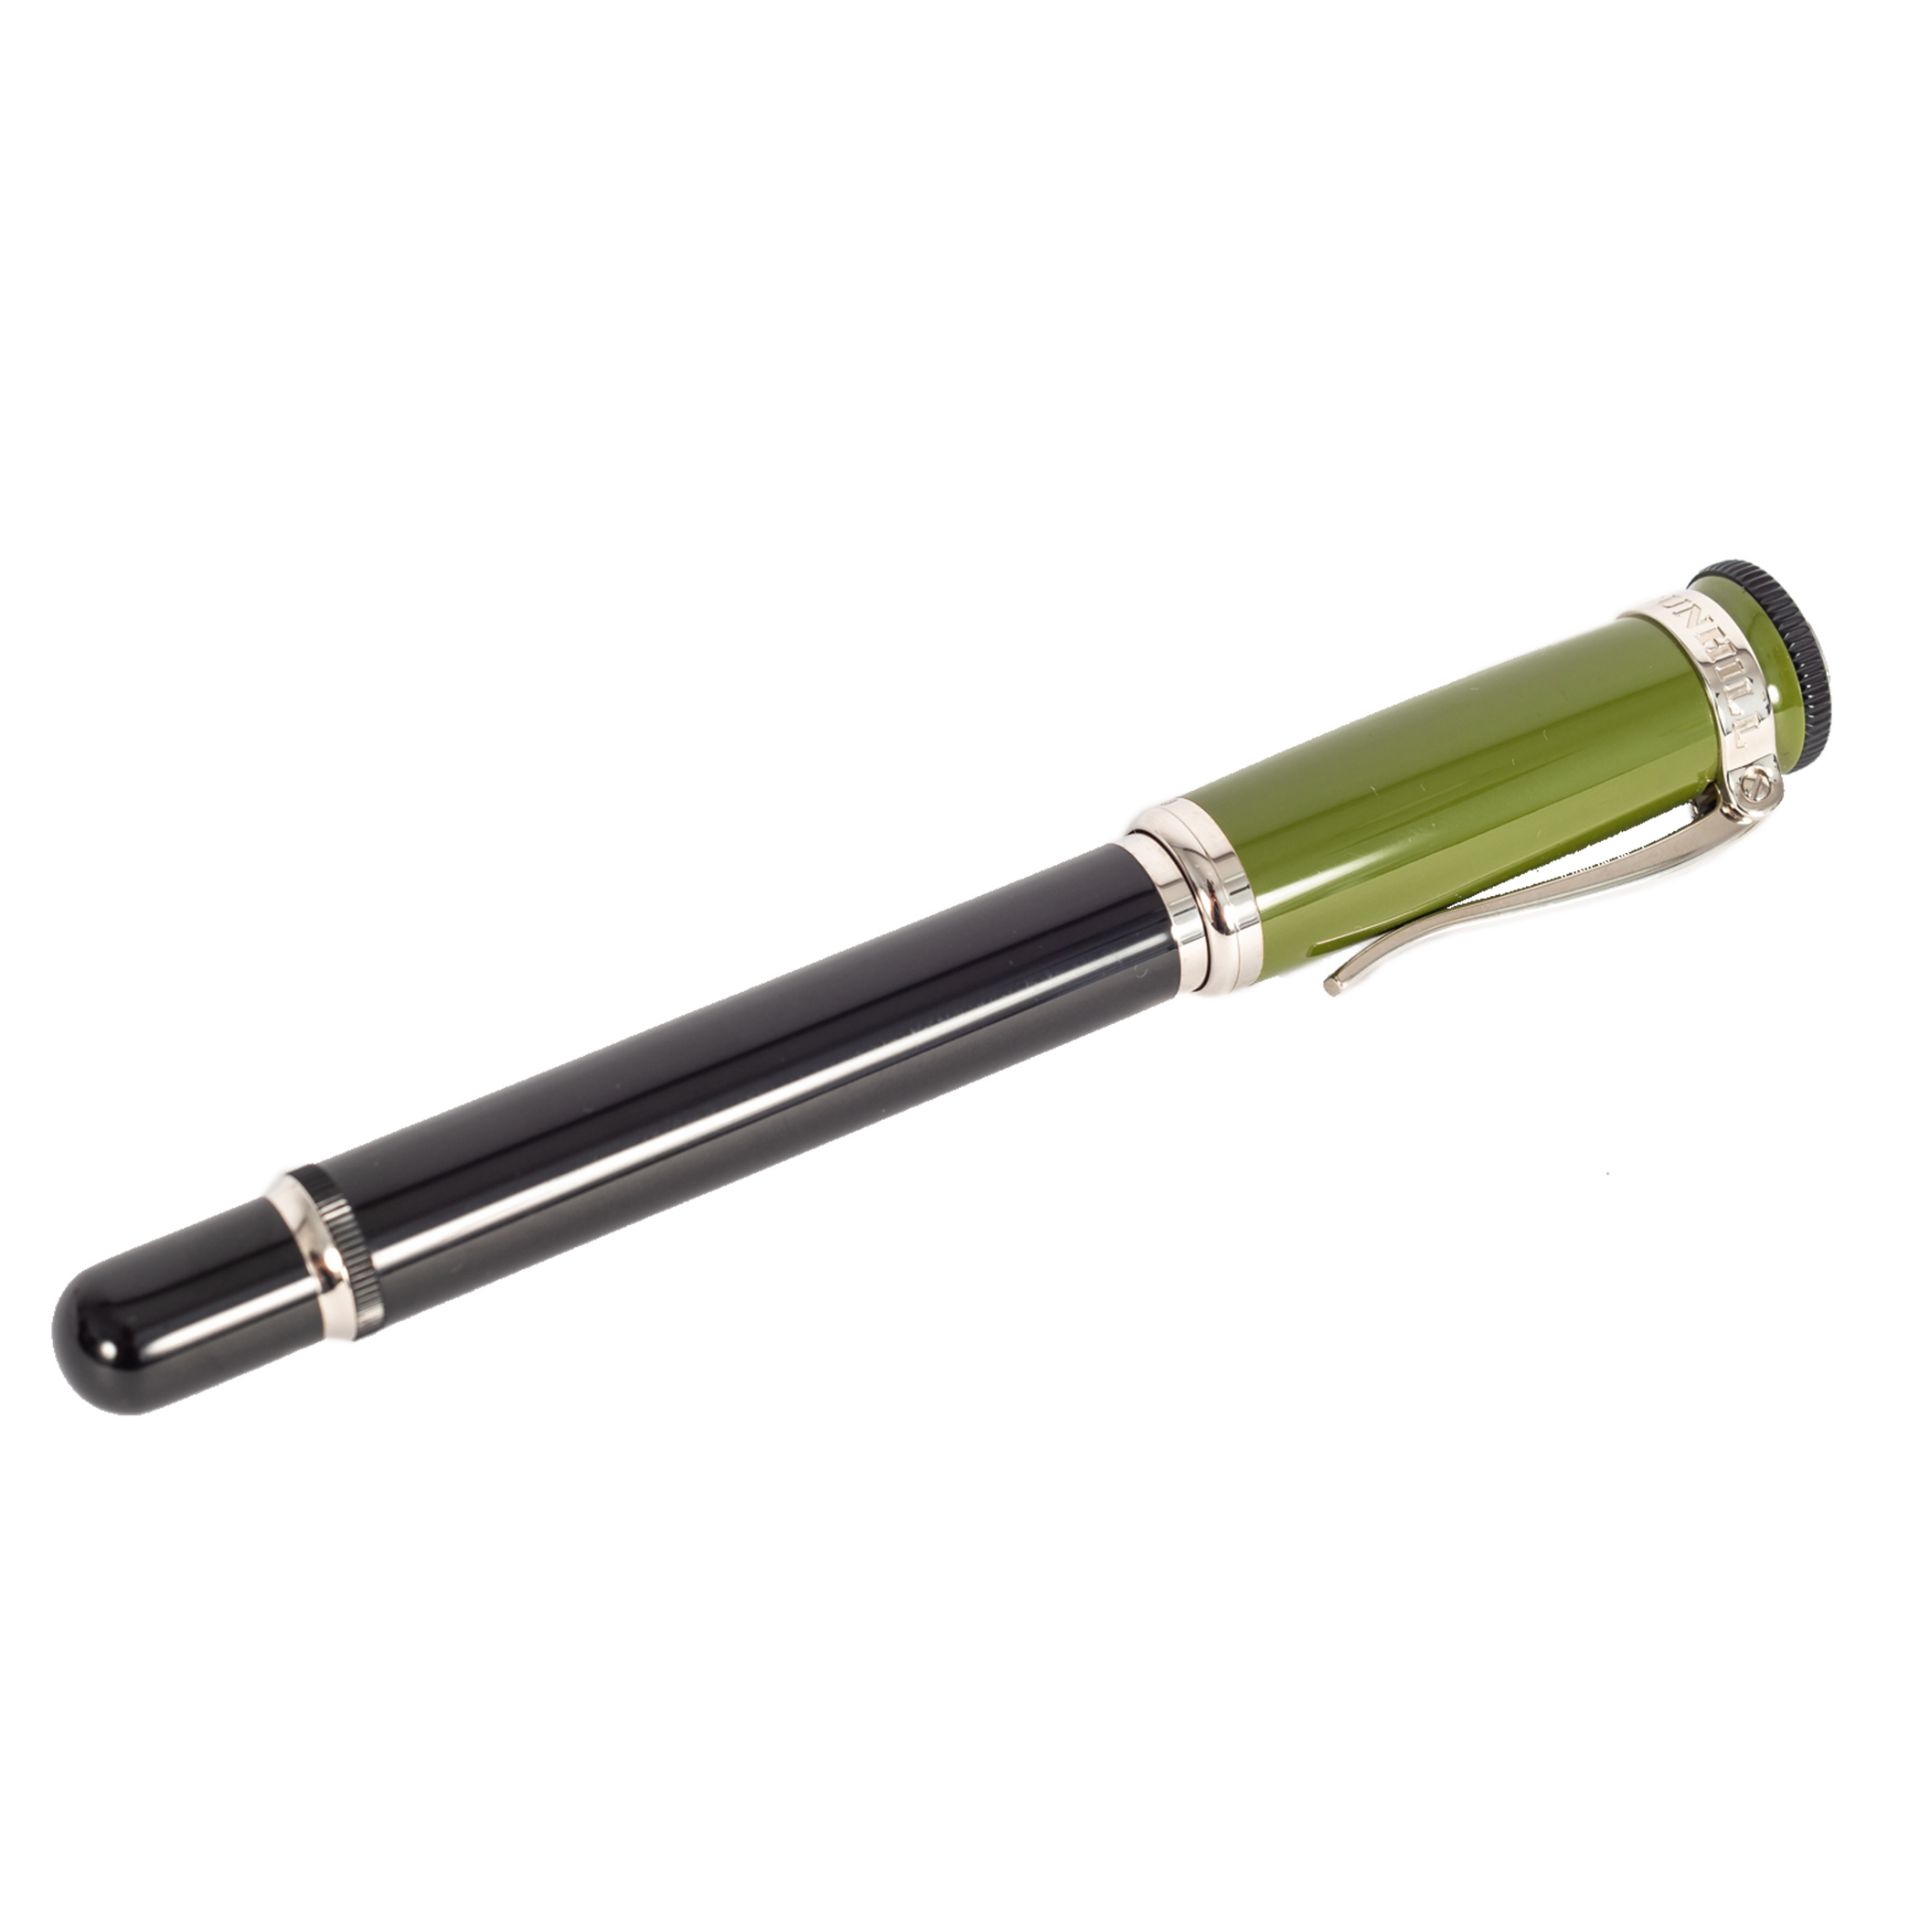 Alfred Dunhill Sentryman collection Flying Scotsman fountain pen.